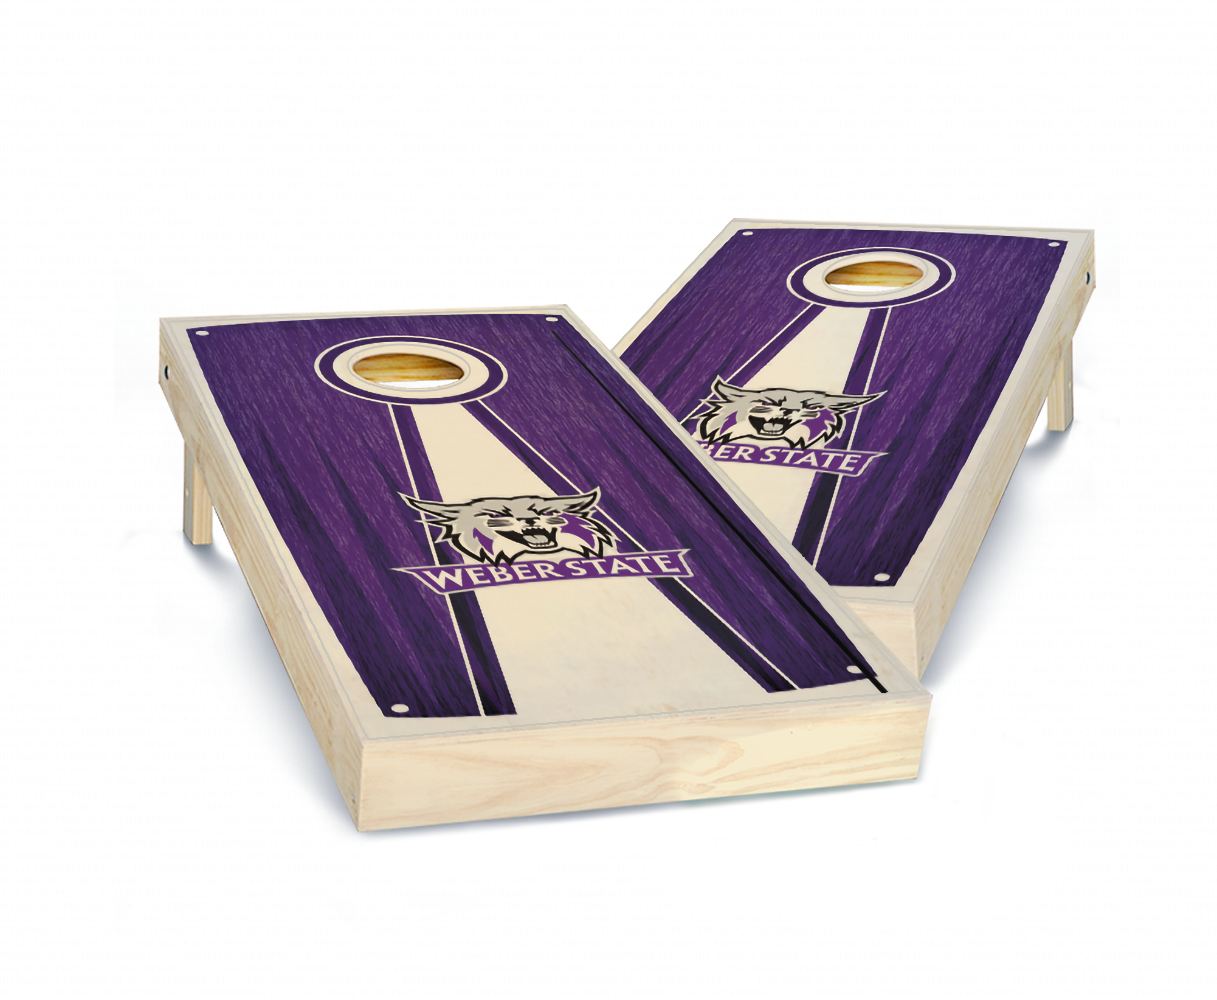 "Weber State Stained Pyramid" Cornhole Boards